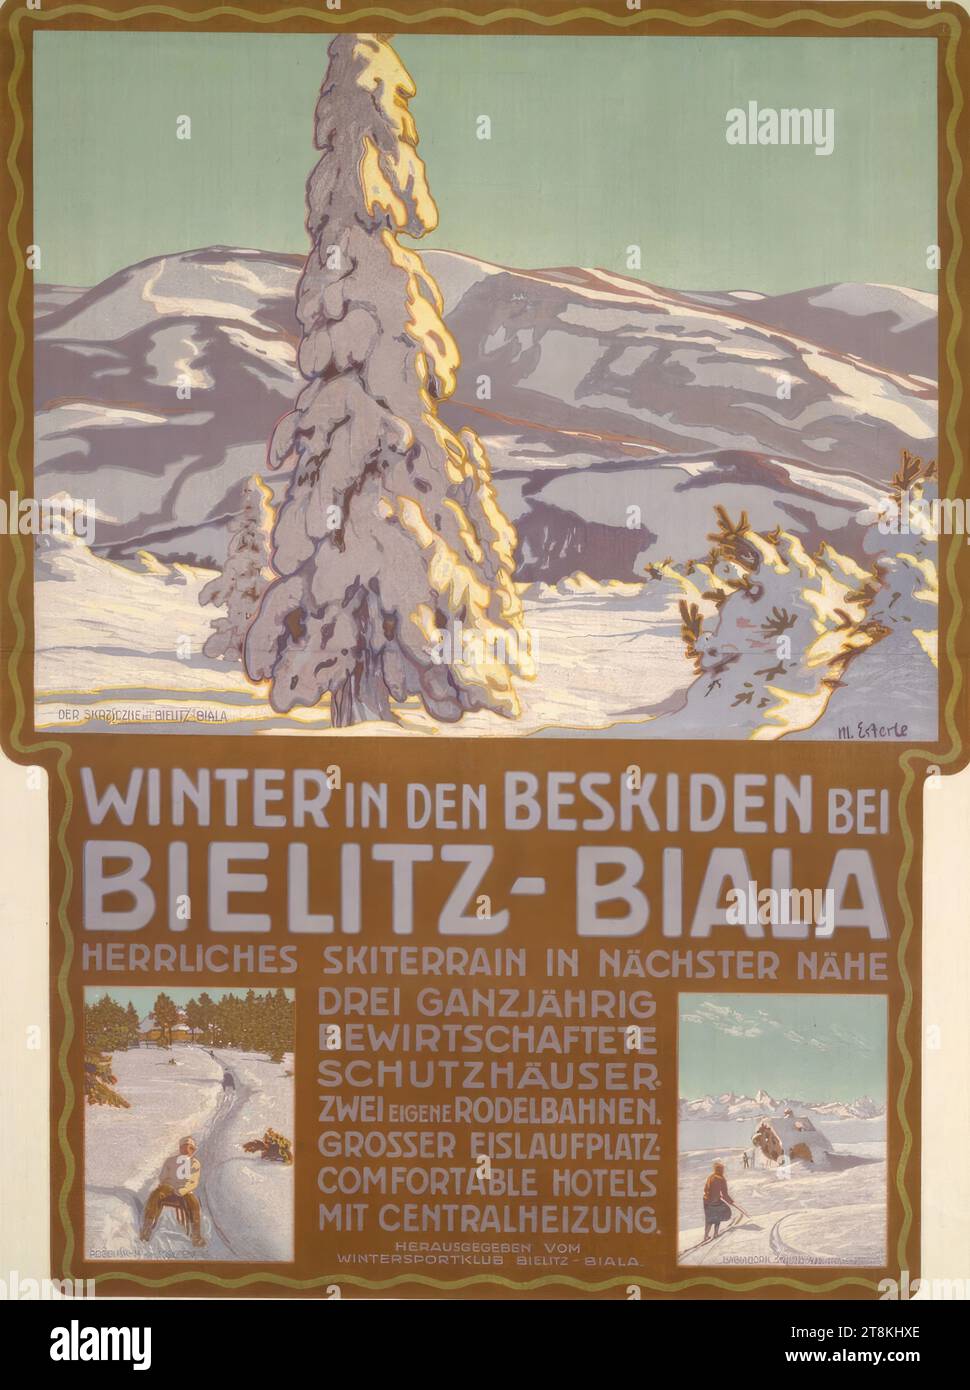 WINTER IN THE BESKIDS NEAR BIELITZ-BIALA, Max Esterle, Austria, 1870 - 1947, around 1910, print, color lithograph, sheet: 1060 mm x 810 mm, M.l. 'THE SKPZY'CZNE AT BIELITZ-BIALA', in print, M.u. 'WINTER IN THE BESKIDS NEAR / BIELITZ-BIALA / MAGNIFICENT SKI RAIN IN THE CLOSE AREA / THREE ALL YEAR ROUND / MANAGED / PROTECTION HUTS / TWO OWN TOBOGGAN RUNS. / LARGE ICE RACK. / COMFORTABLE HOTELS / WITH CENTRAL HEATING. / PUBLISHED BY / WINTER SPORTS CLUB BIELITZ-BIALA / WAGNER'S UNIVERSITÄTS-BUCHDRUCKEREI, INNSBRUCK', in print Stock Photo